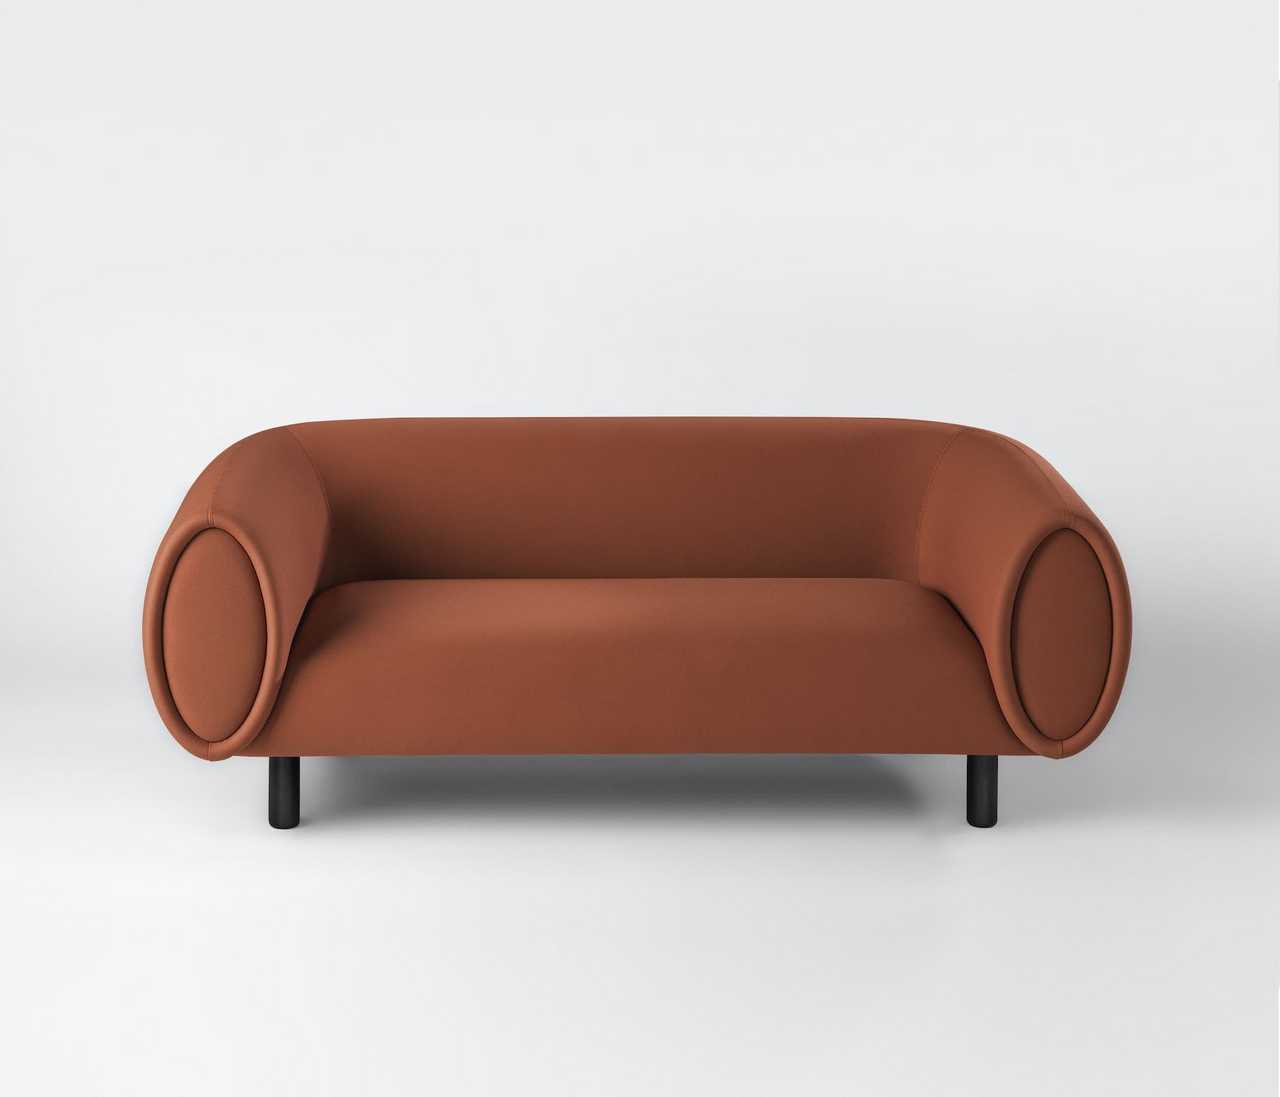 Tobi is a modern sofa design by Rexite that portrays Timeless Elegance